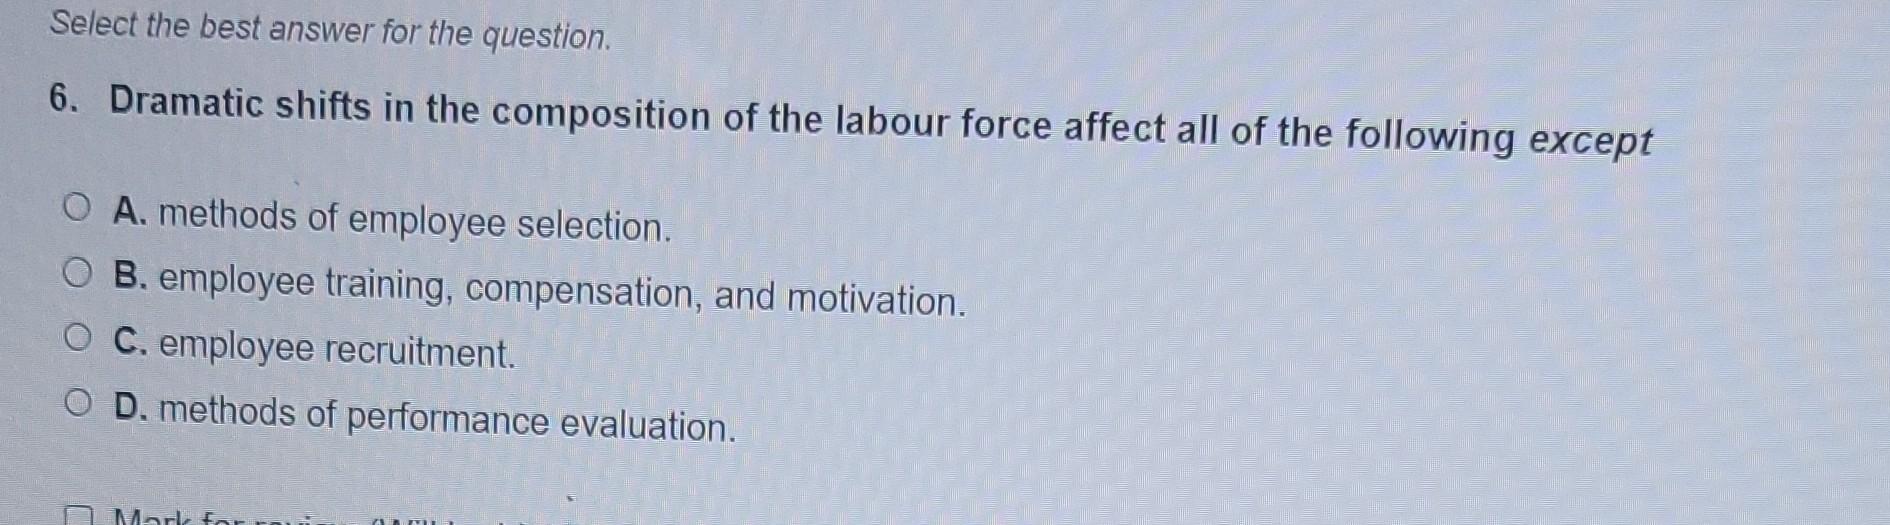 Select the best answer for the question. 6. Dramatic shifts in the composition of the labour force affect all